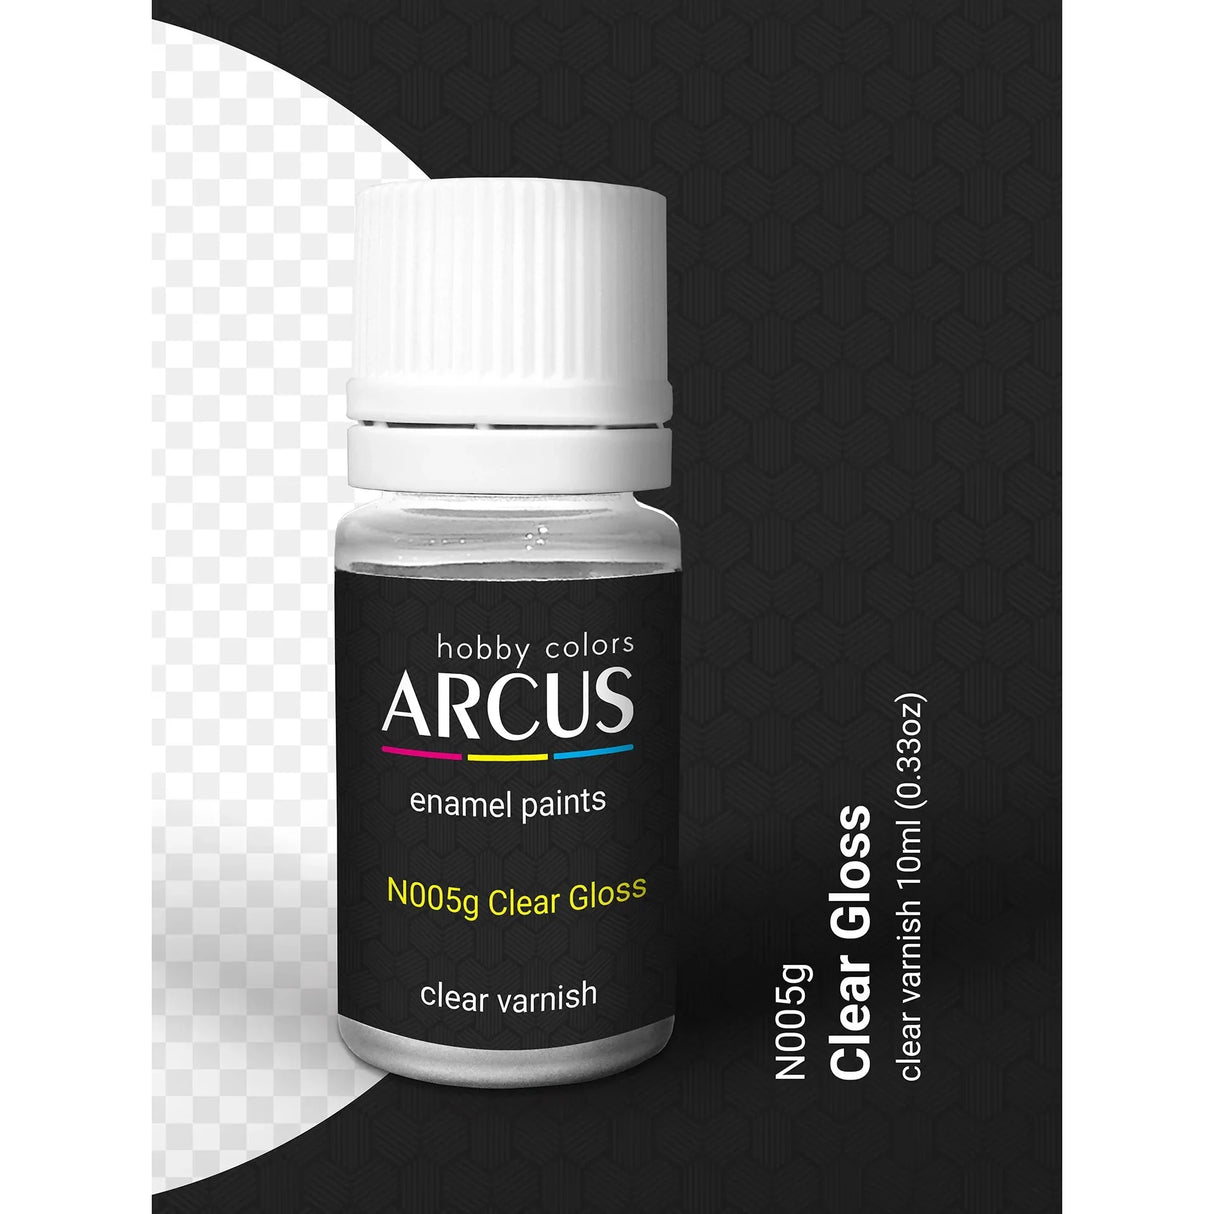 Arcus Hobby Colors Clear Gloss 10ml Bottle - Fusion Scale Hobbies